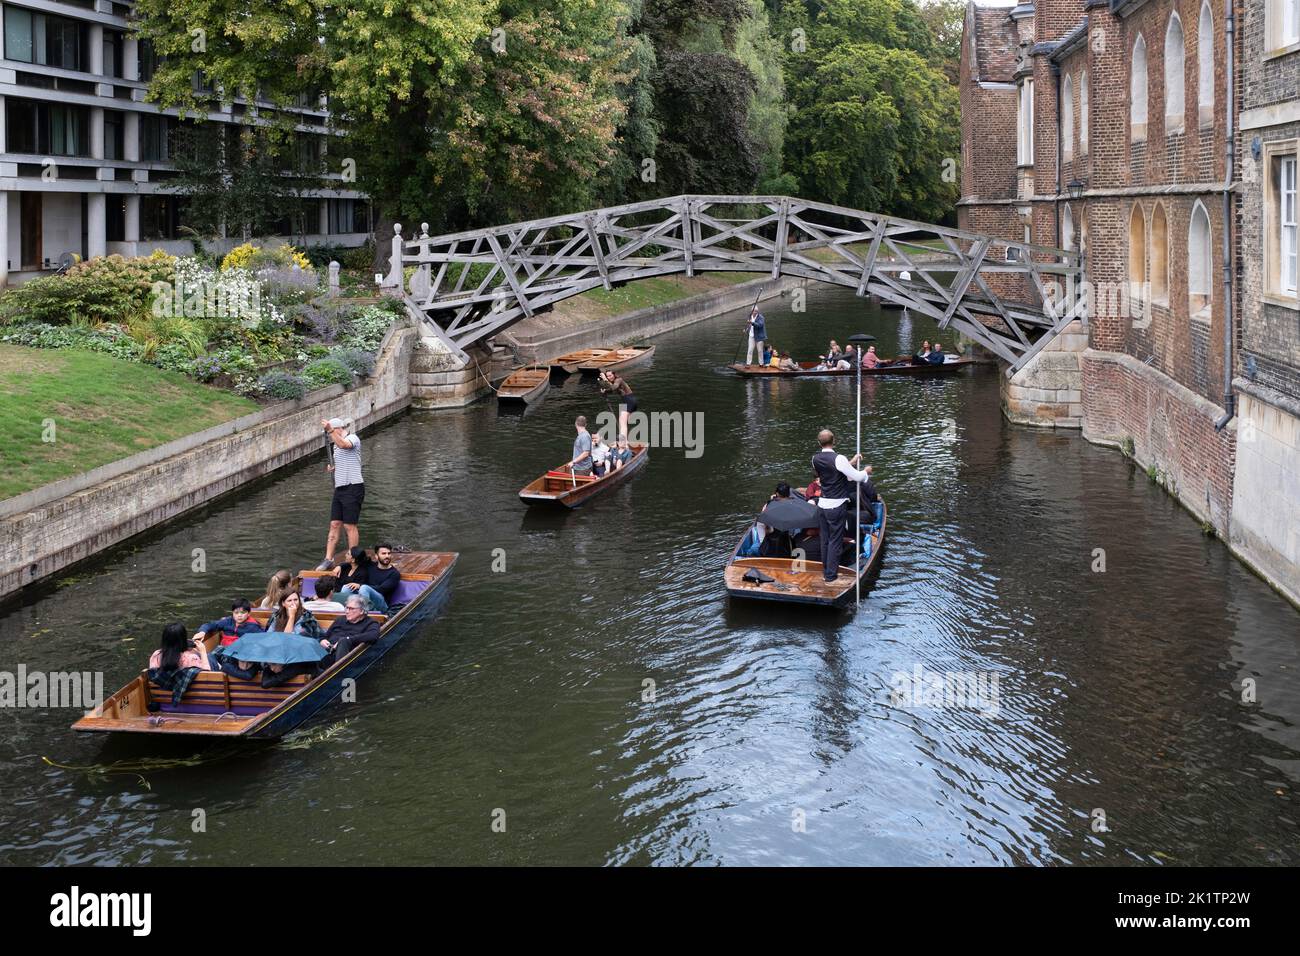 Punting on the River Cam under the famous historic wooden mathematical bridge at Cambridge University, Cambridgeshire. Cambridge University icon Stock Photo